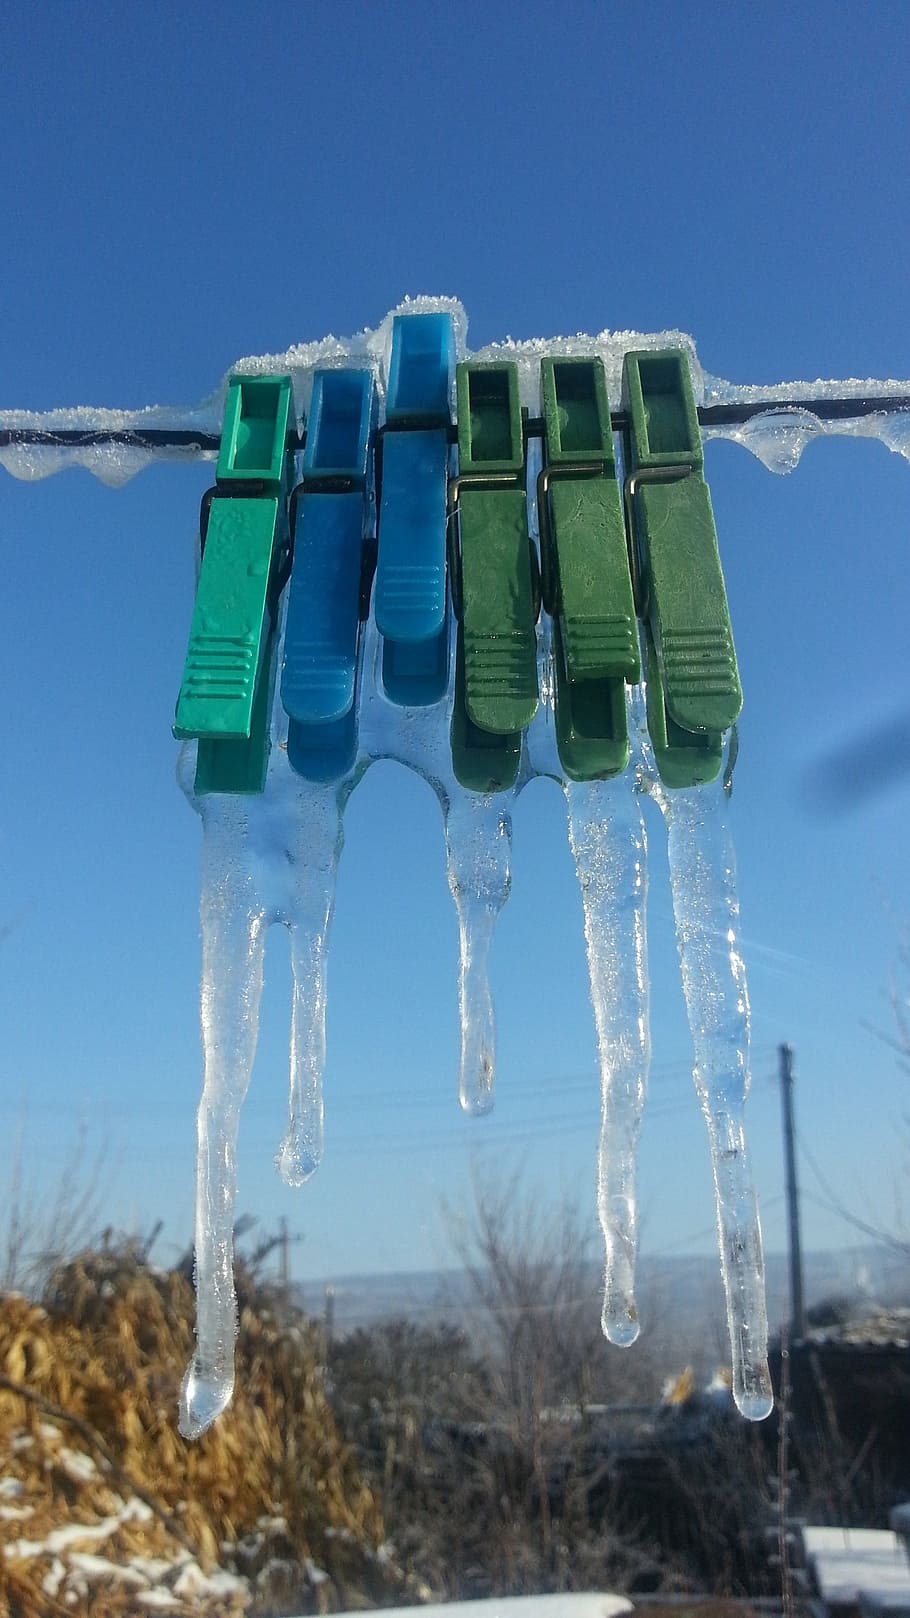 winter, ice, icicles, cold temperature, snow, nature, blue, frozen, hanging, clothesline